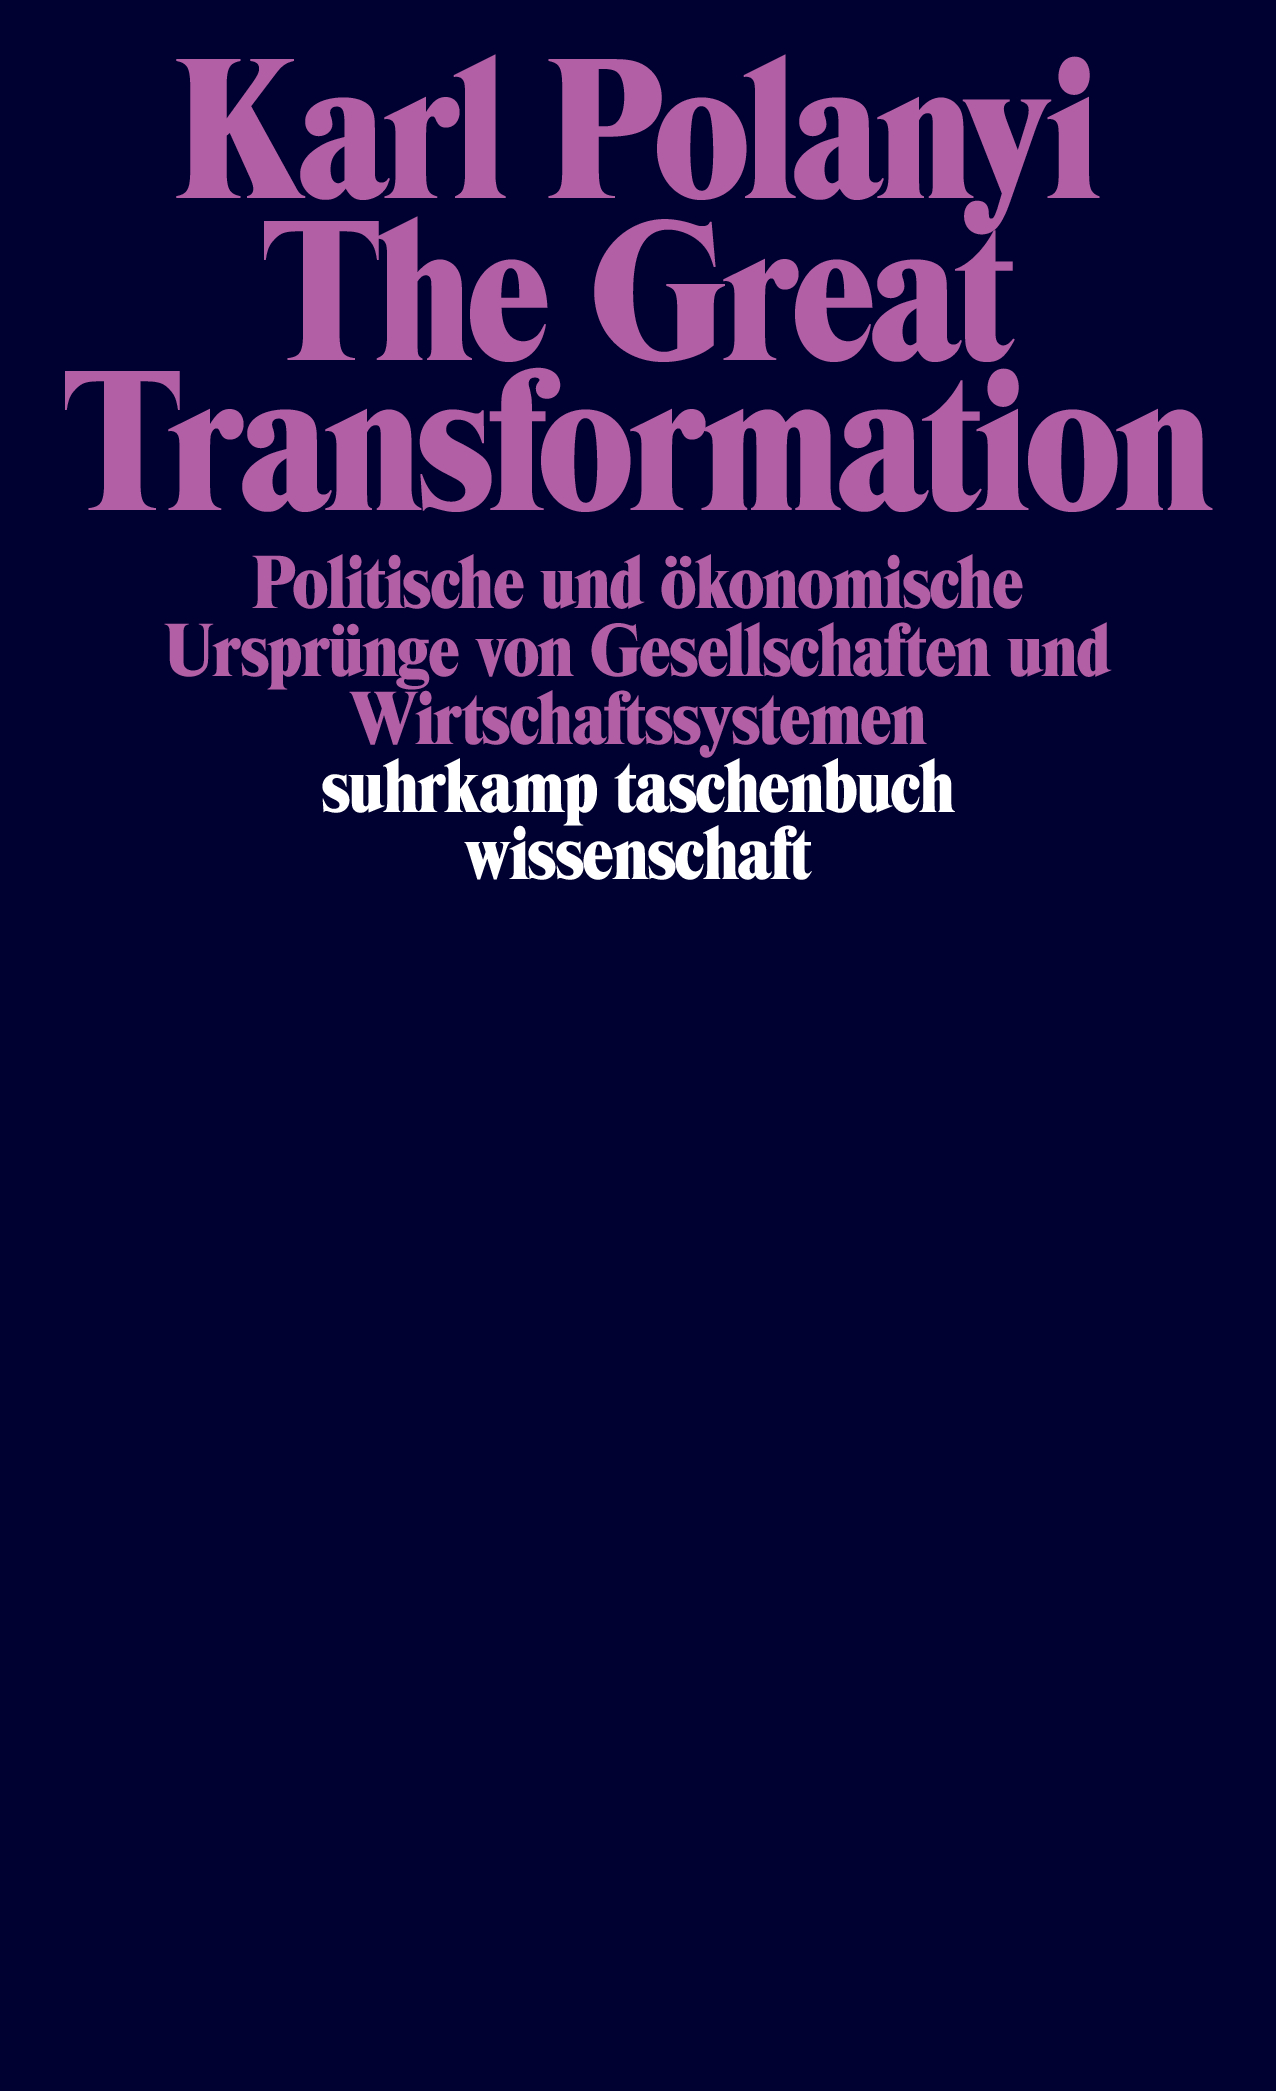 Polanyi, Karl: The Great Transformation, 1973